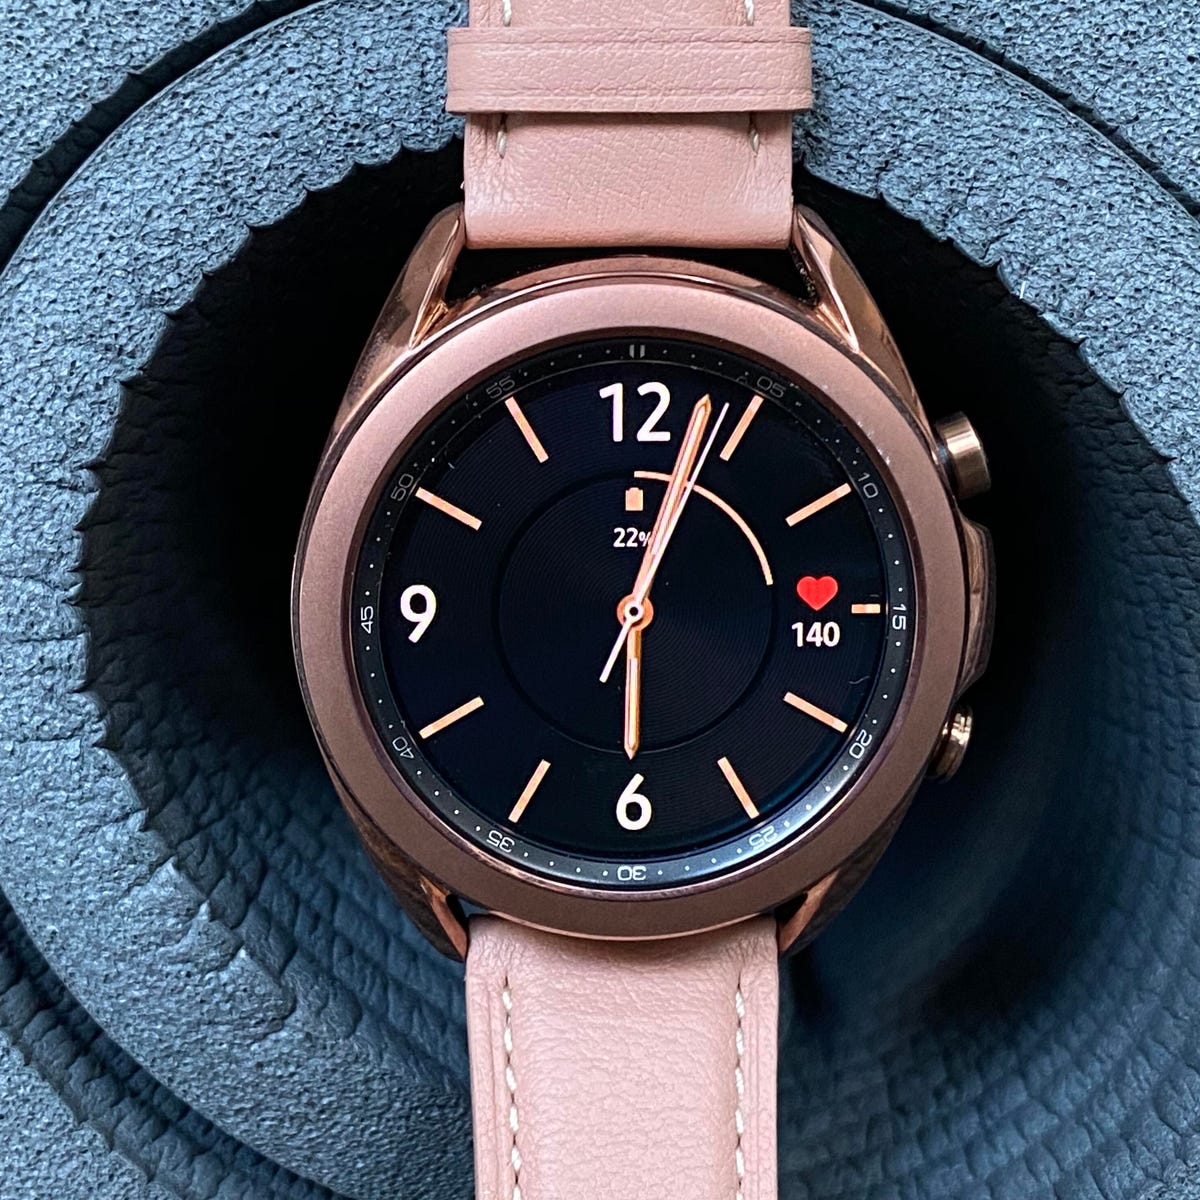 Colibrí temperatura referir Galaxy Watch 3 review: A stunning smartwatch with SpO2 tracking and ECG -  CNET